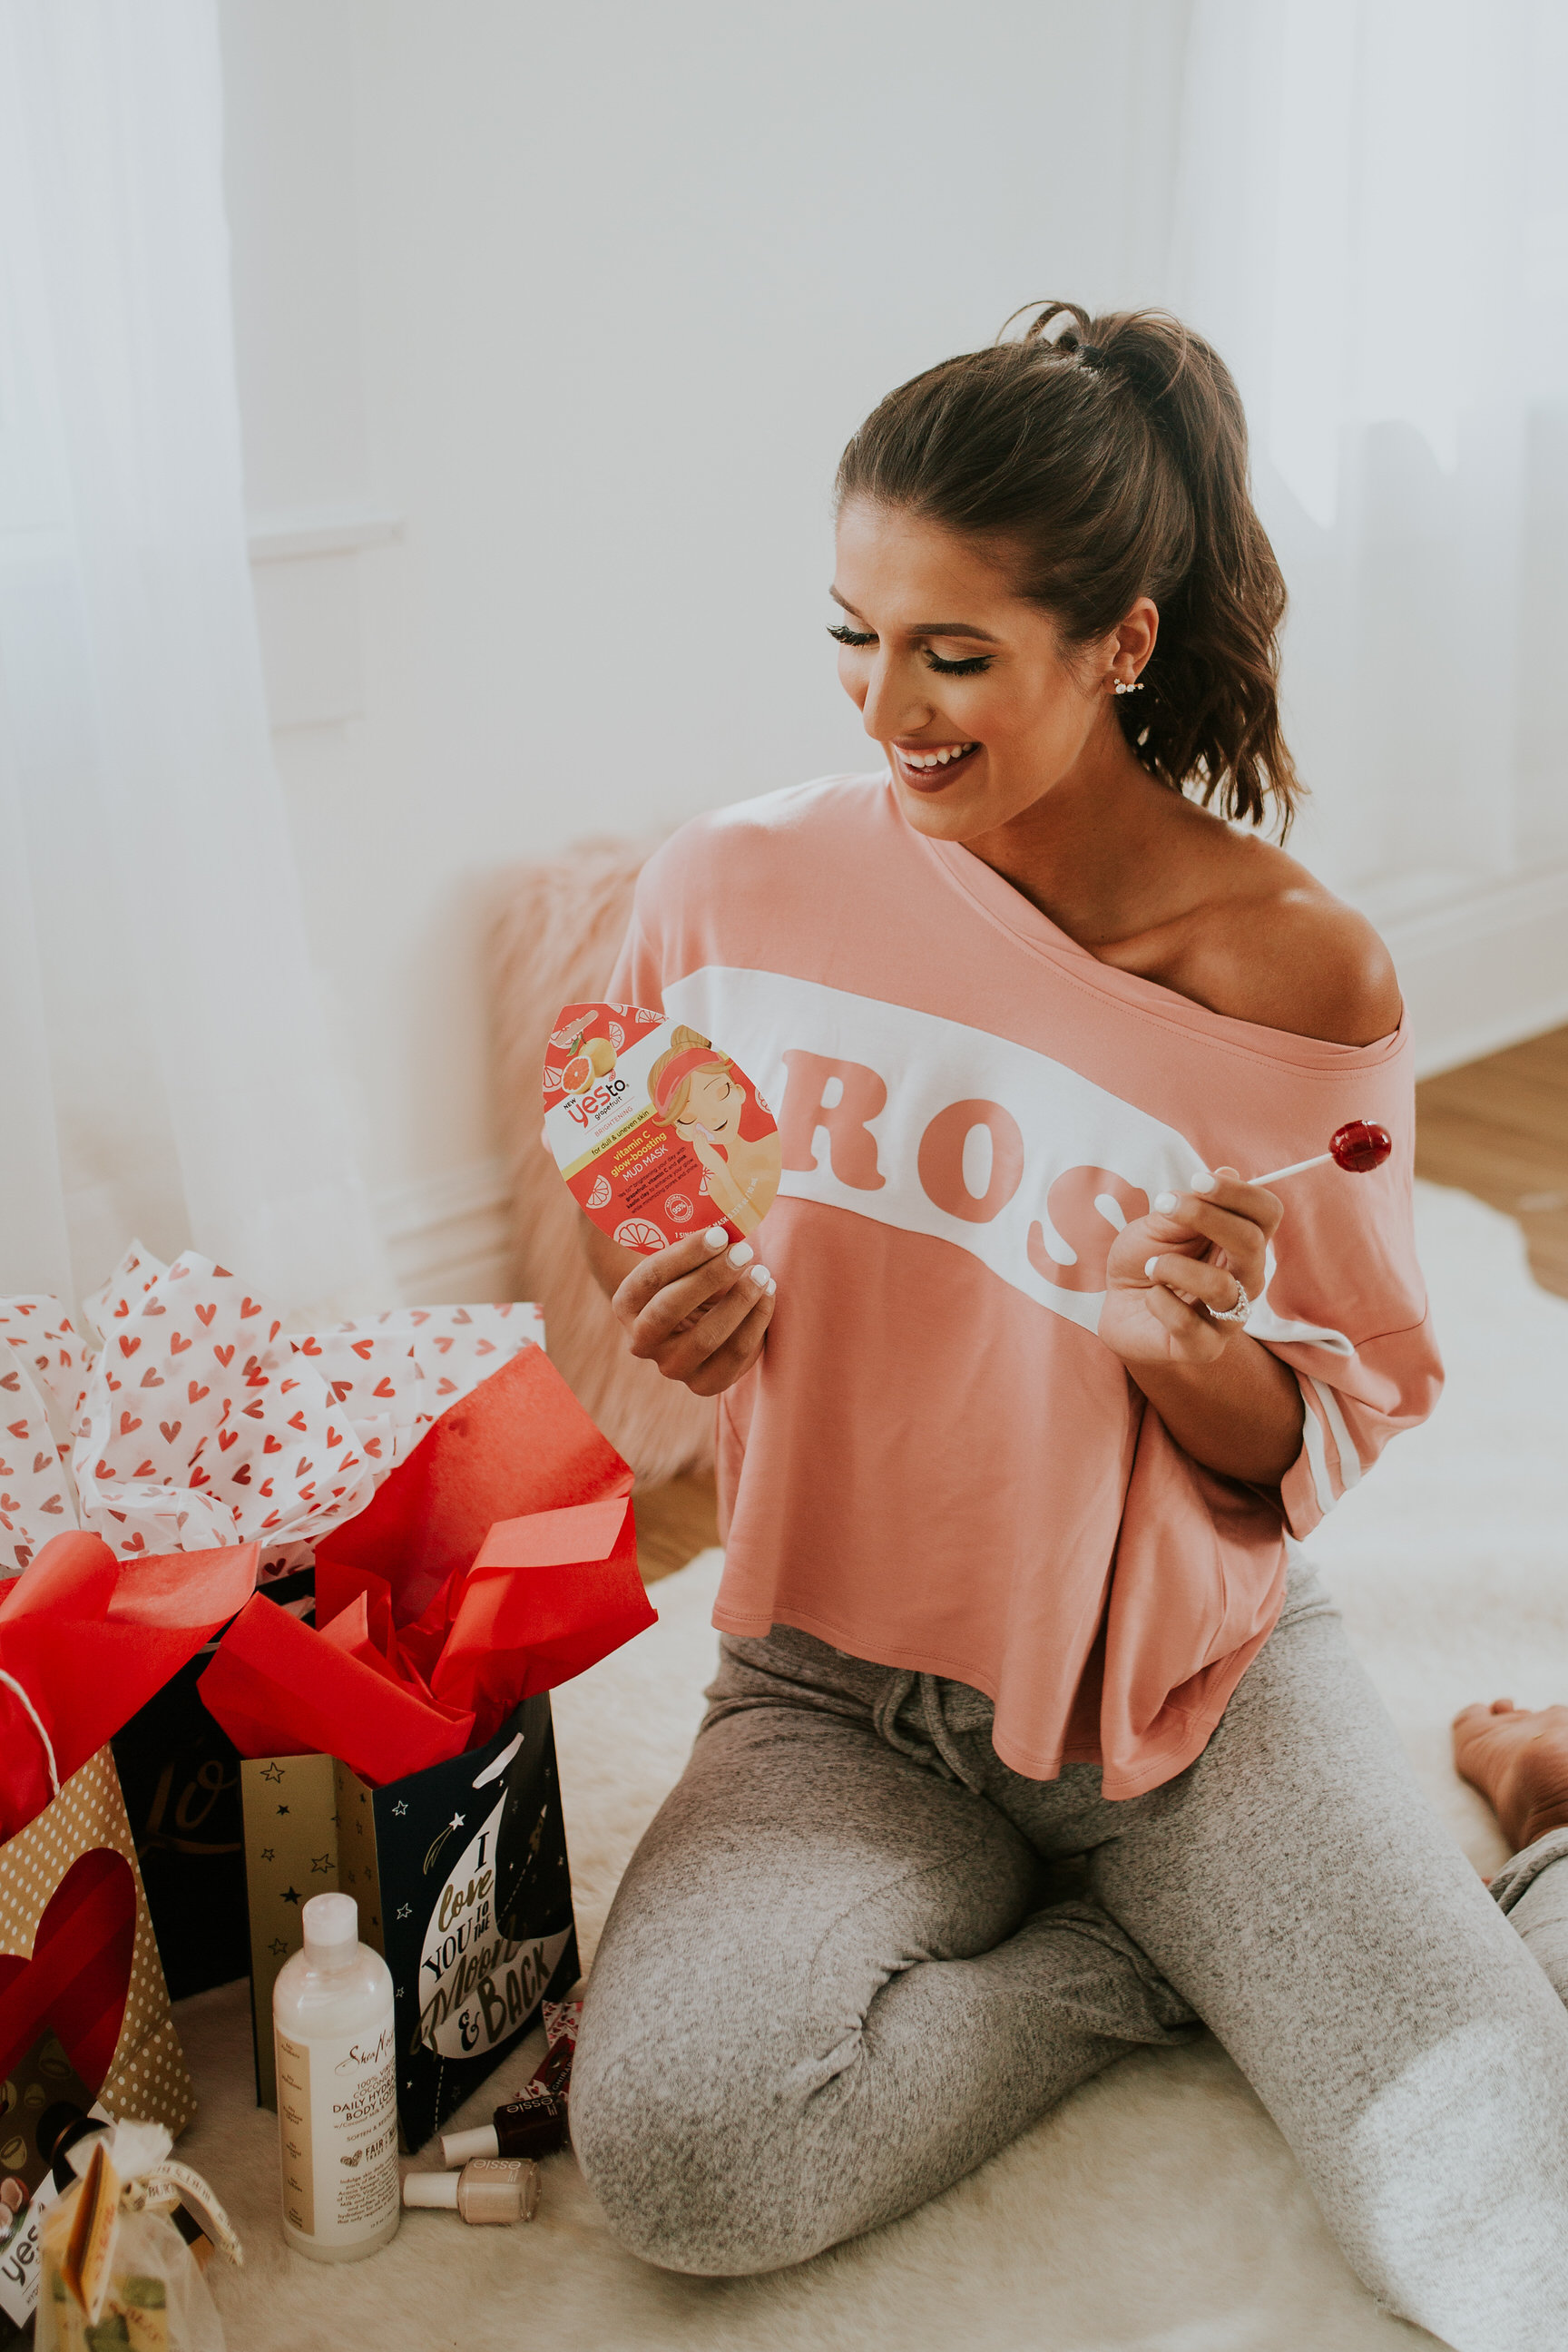 galentine's day gifts, walmart gift guide, walmart valentine's day, galentine's day, galentine's gifts, galentine's gift guide, valentine's day gift guide // grace wainwright a southern drawl